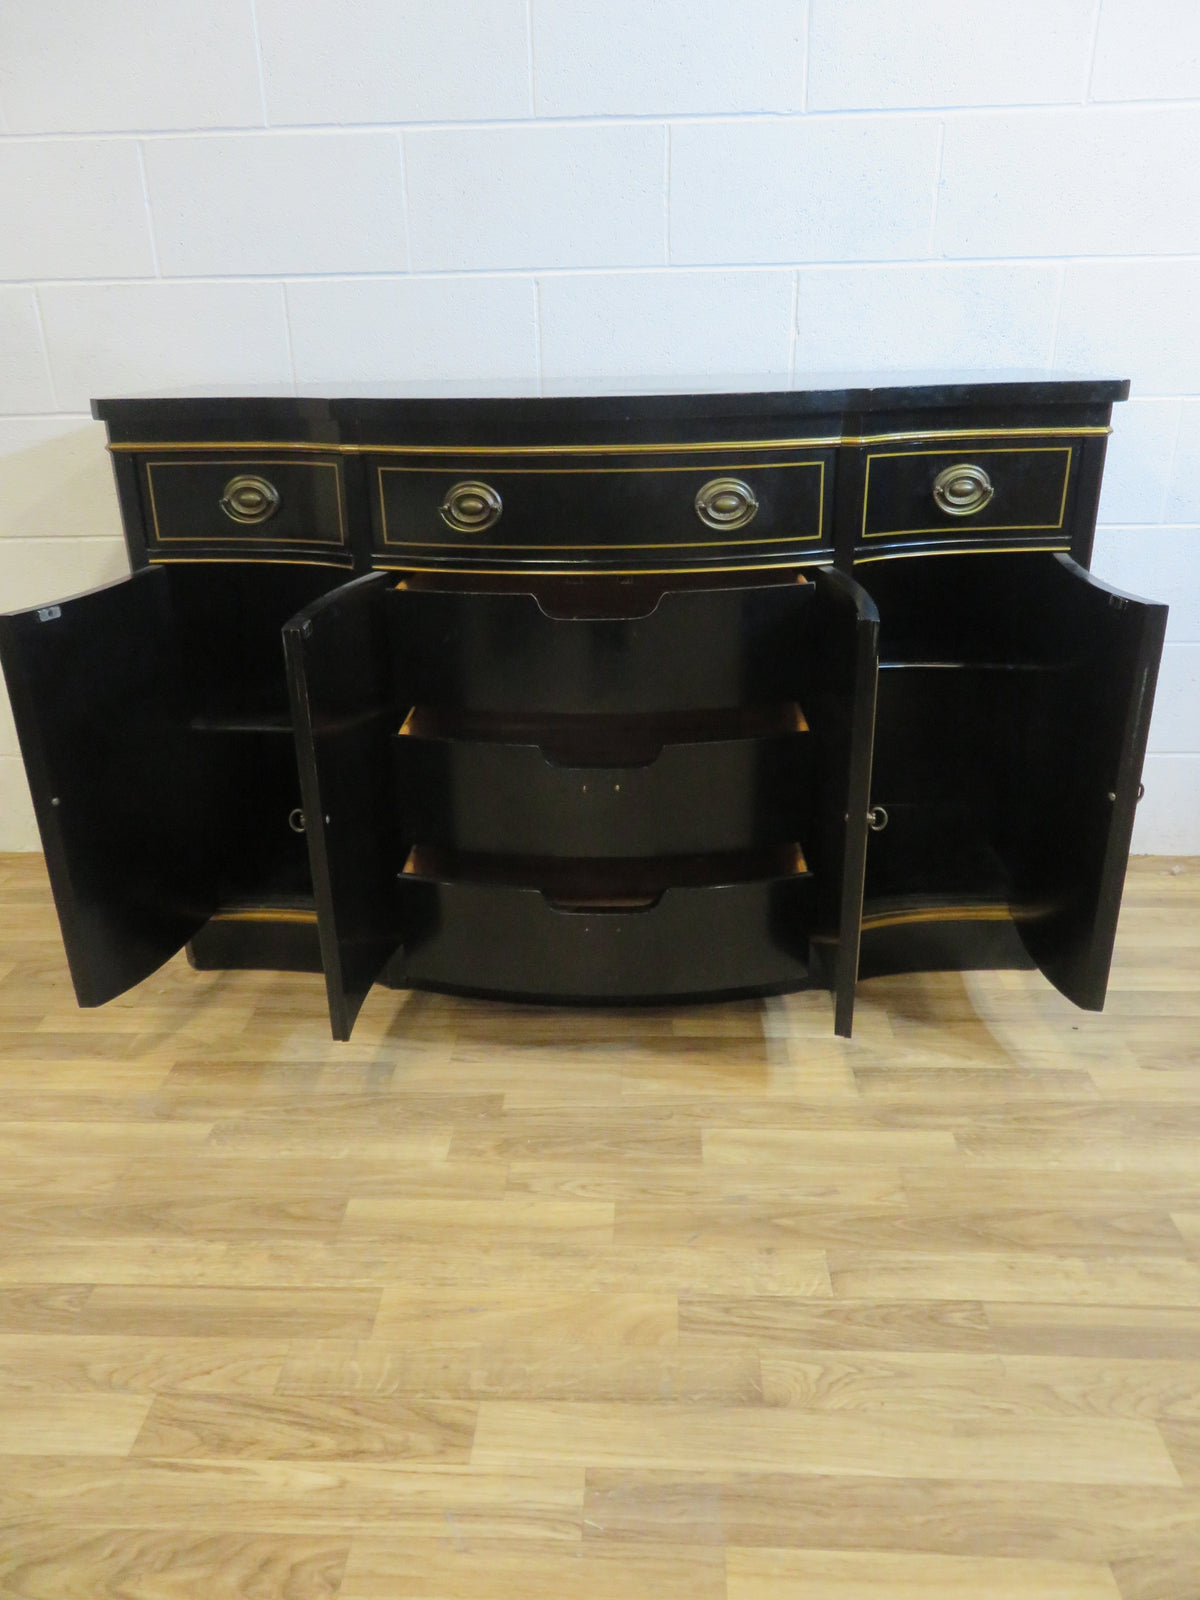 6-Drawer Dresser with Asian Theme